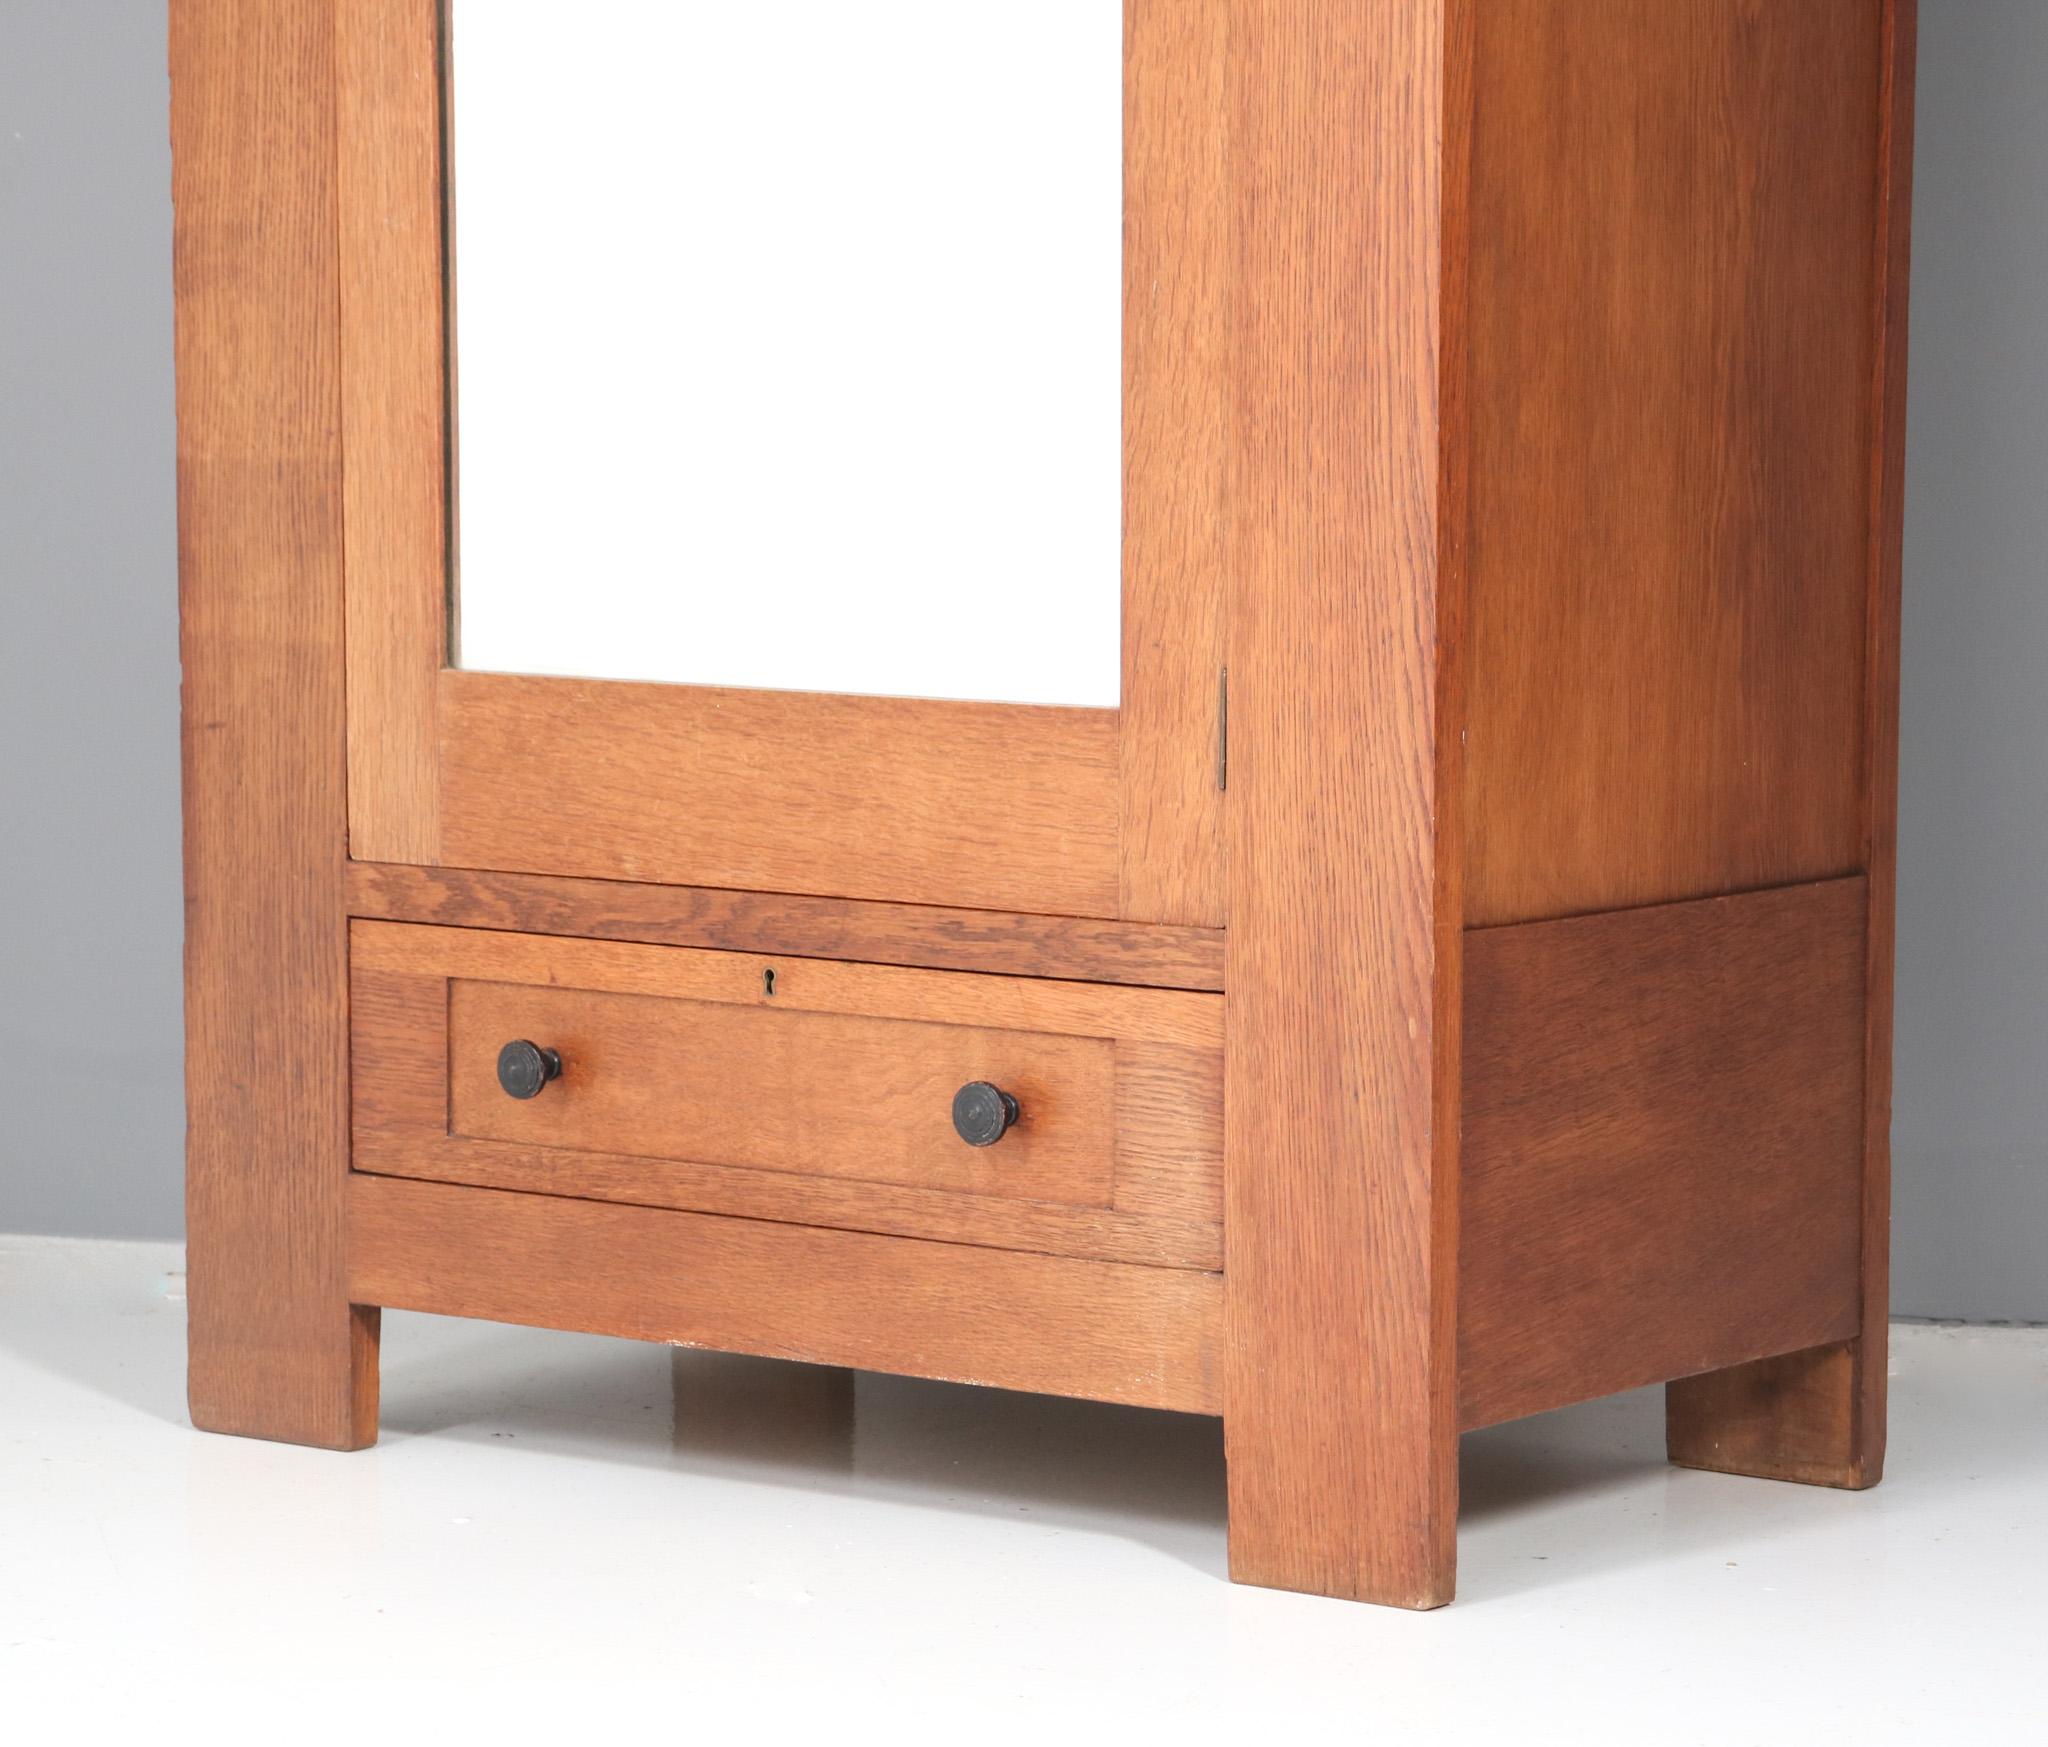 Early 20th Century  Art Deco Modernist Oak Armoire or Wardrobe by Hendrik Wouda for Pander, 1924 For Sale